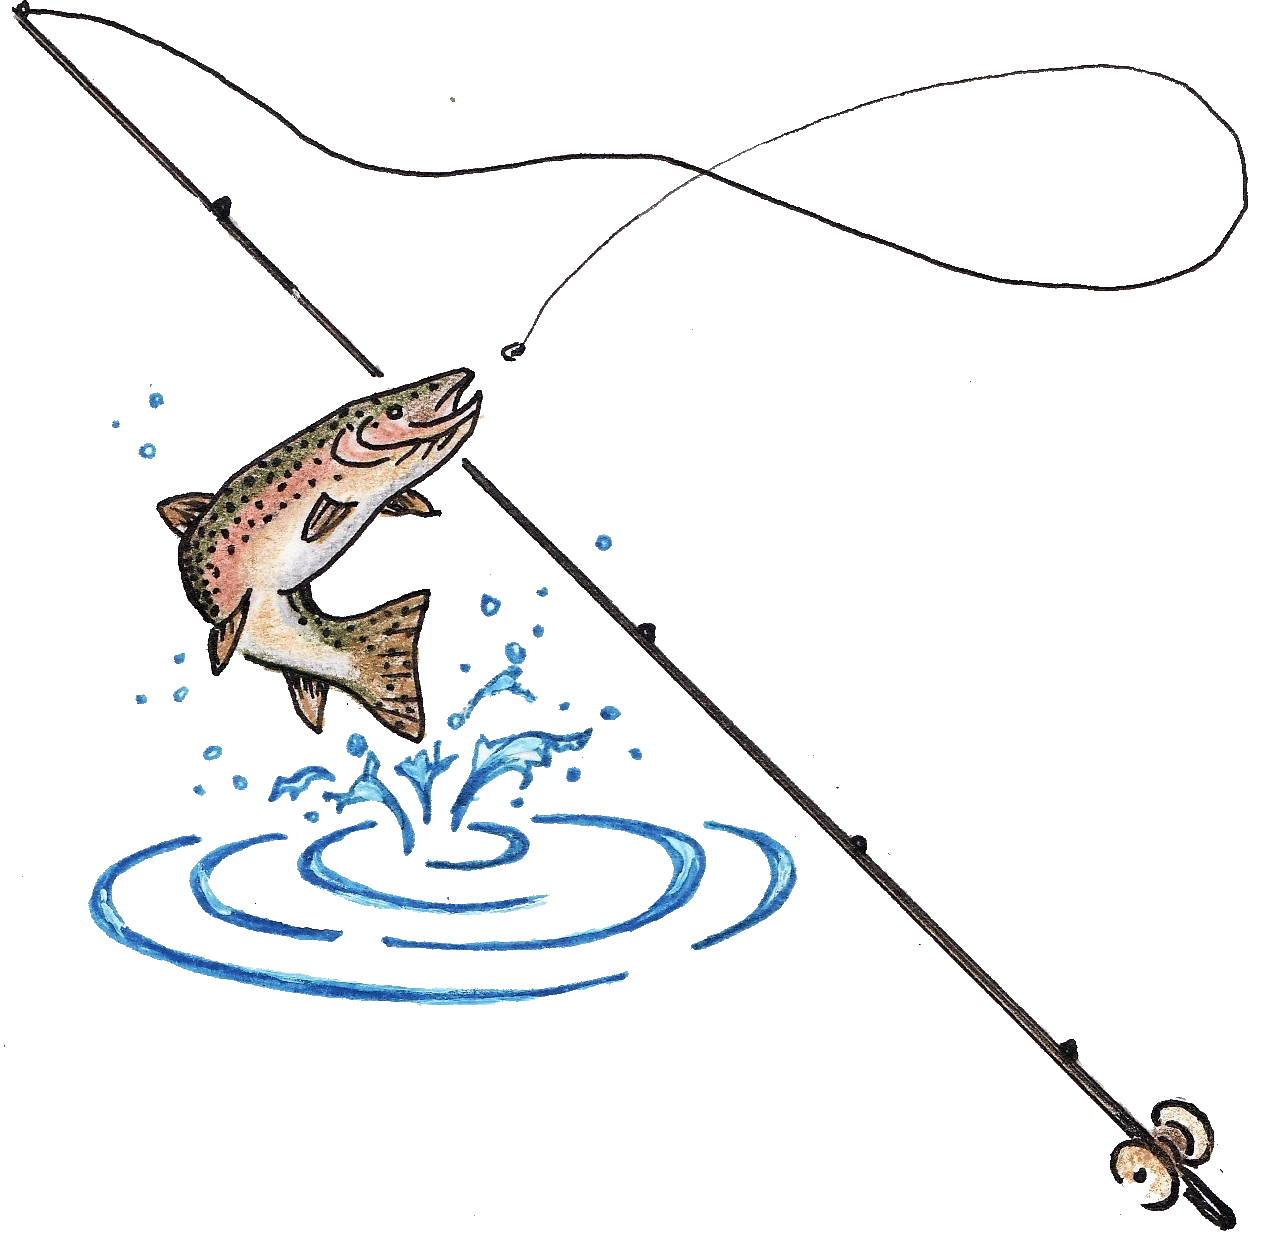 Fishing pole 0 images about fishing lures and rods on clipart.